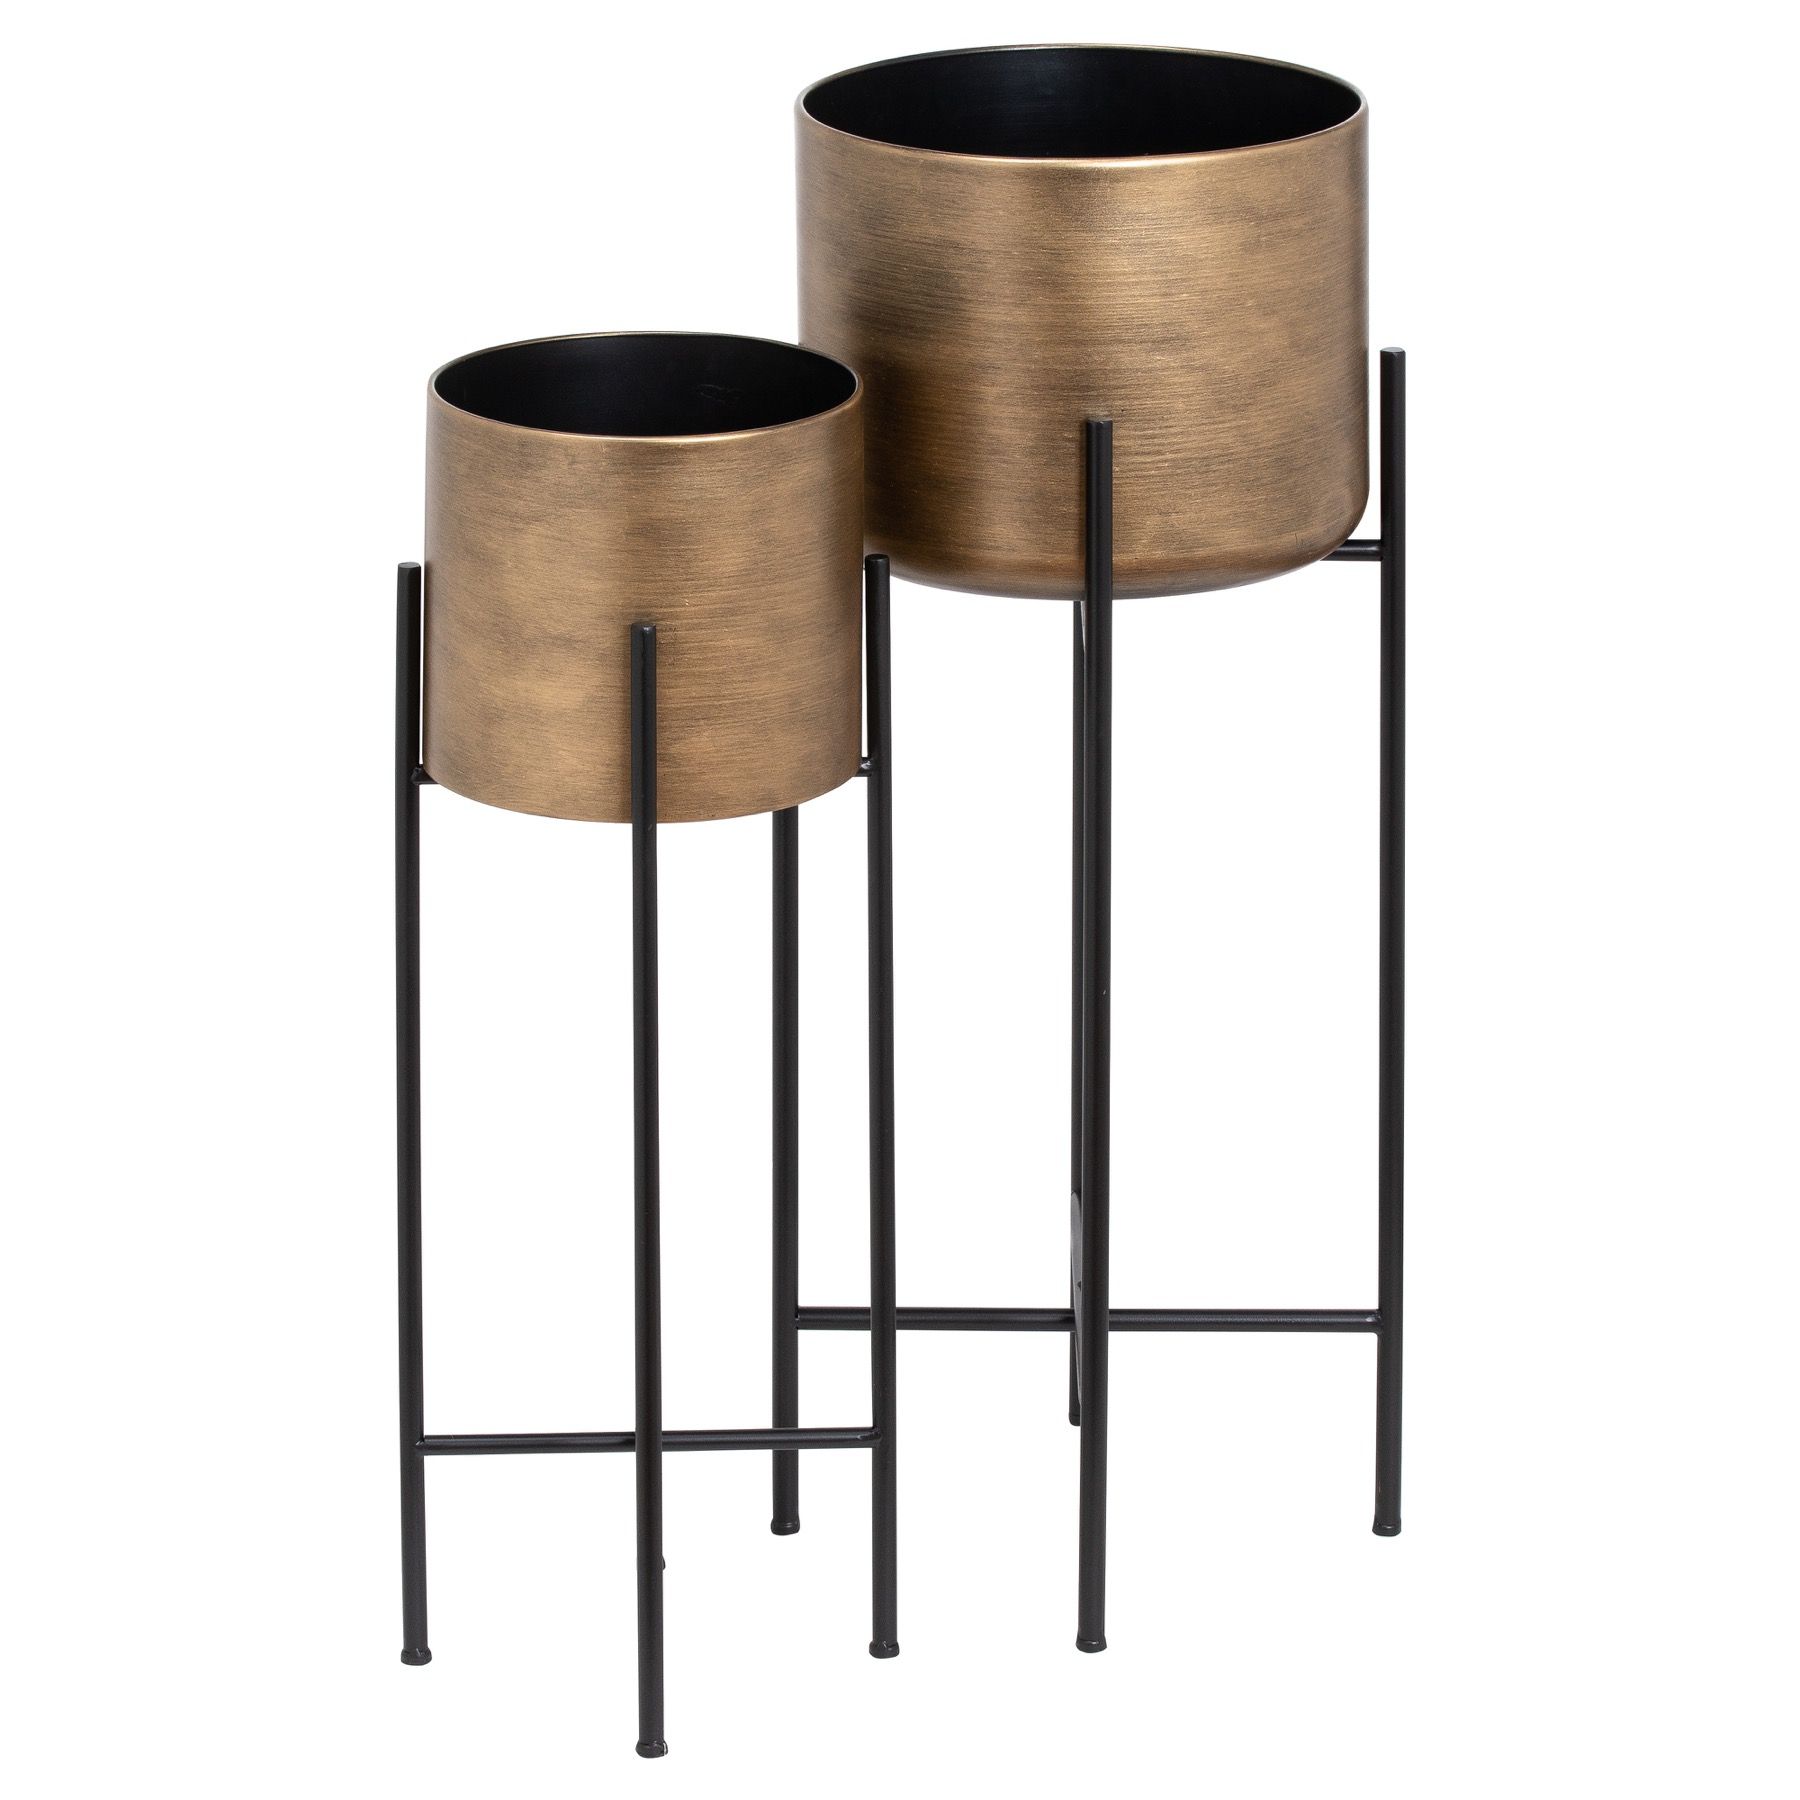 Set Of Two Bronze Planters On Stand | Wholesalehill Interiors Pertaining To Bronze Plant Stands (View 8 of 15)